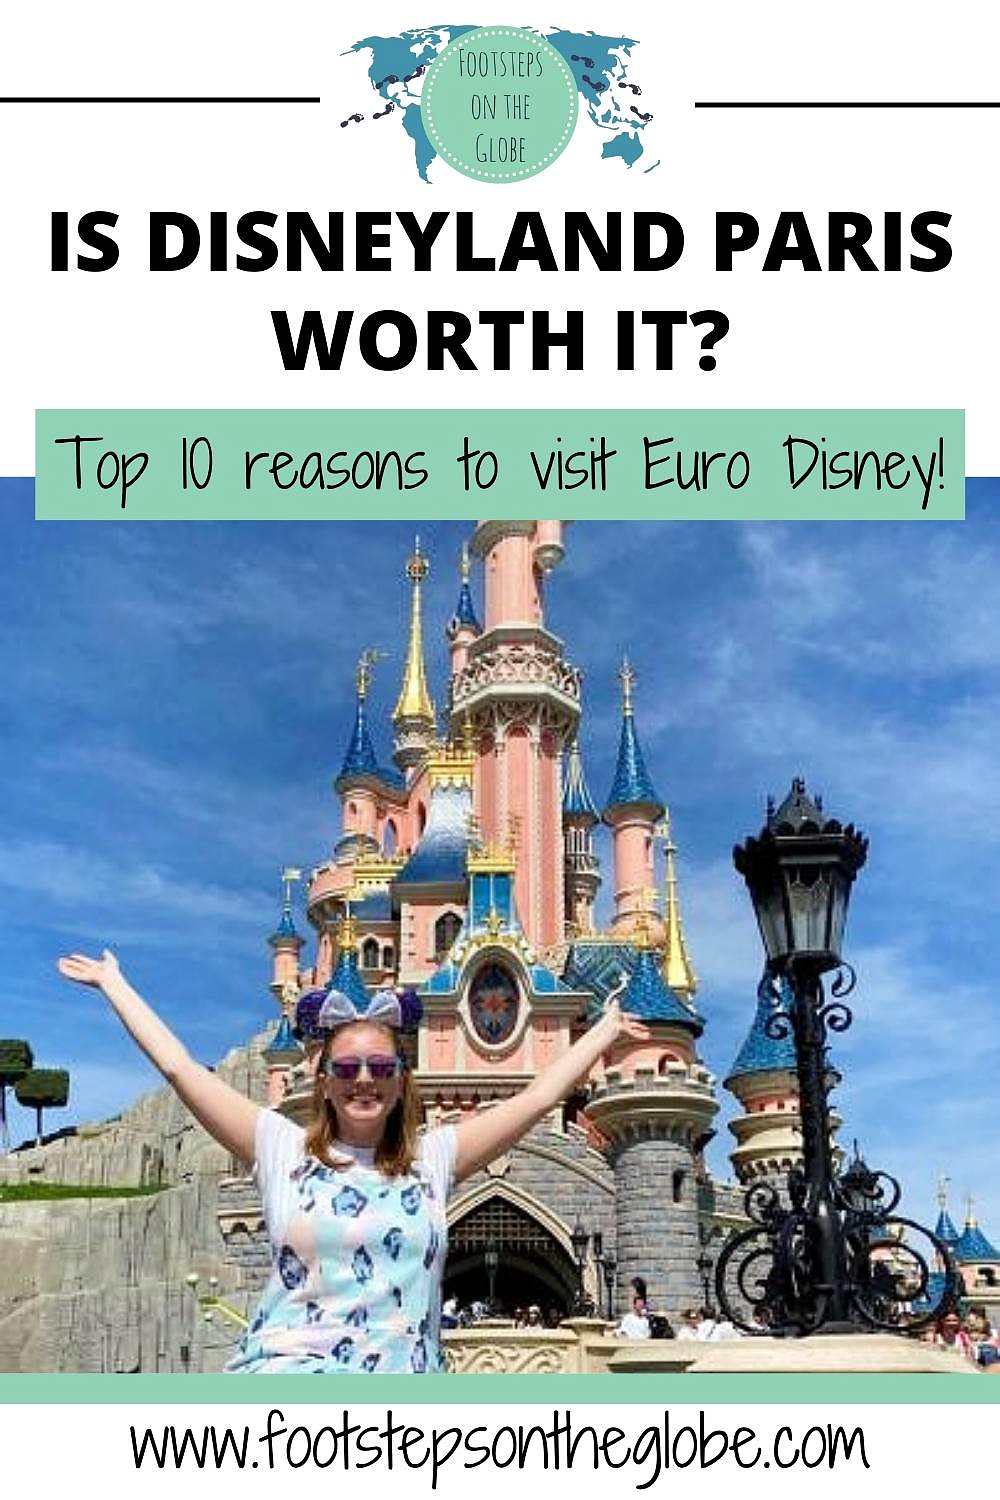 Pinterest image of Mel wearing Minnie Mouse ears and blue and green overalls with her arms up outside Sleeping Beauty's castle in Disneyland Paris with the text: "Is Disneyland Paris worth it top 10 reasons to visit Euro Disney"